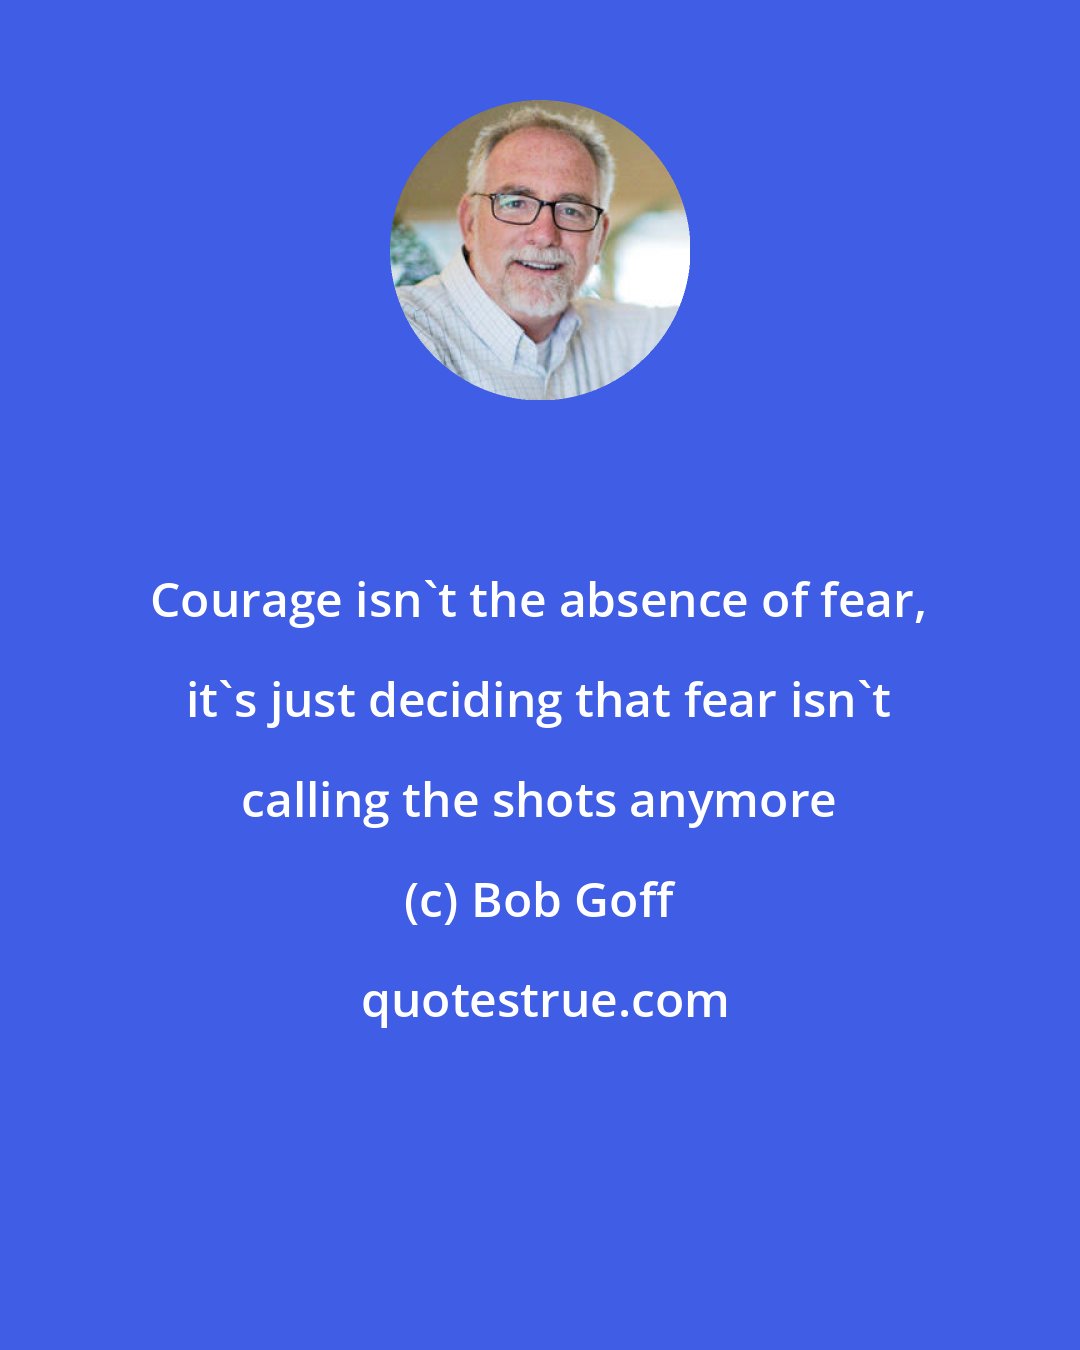 Bob Goff: Courage isn't the absence of fear, it's just deciding that fear isn't calling the shots anymore